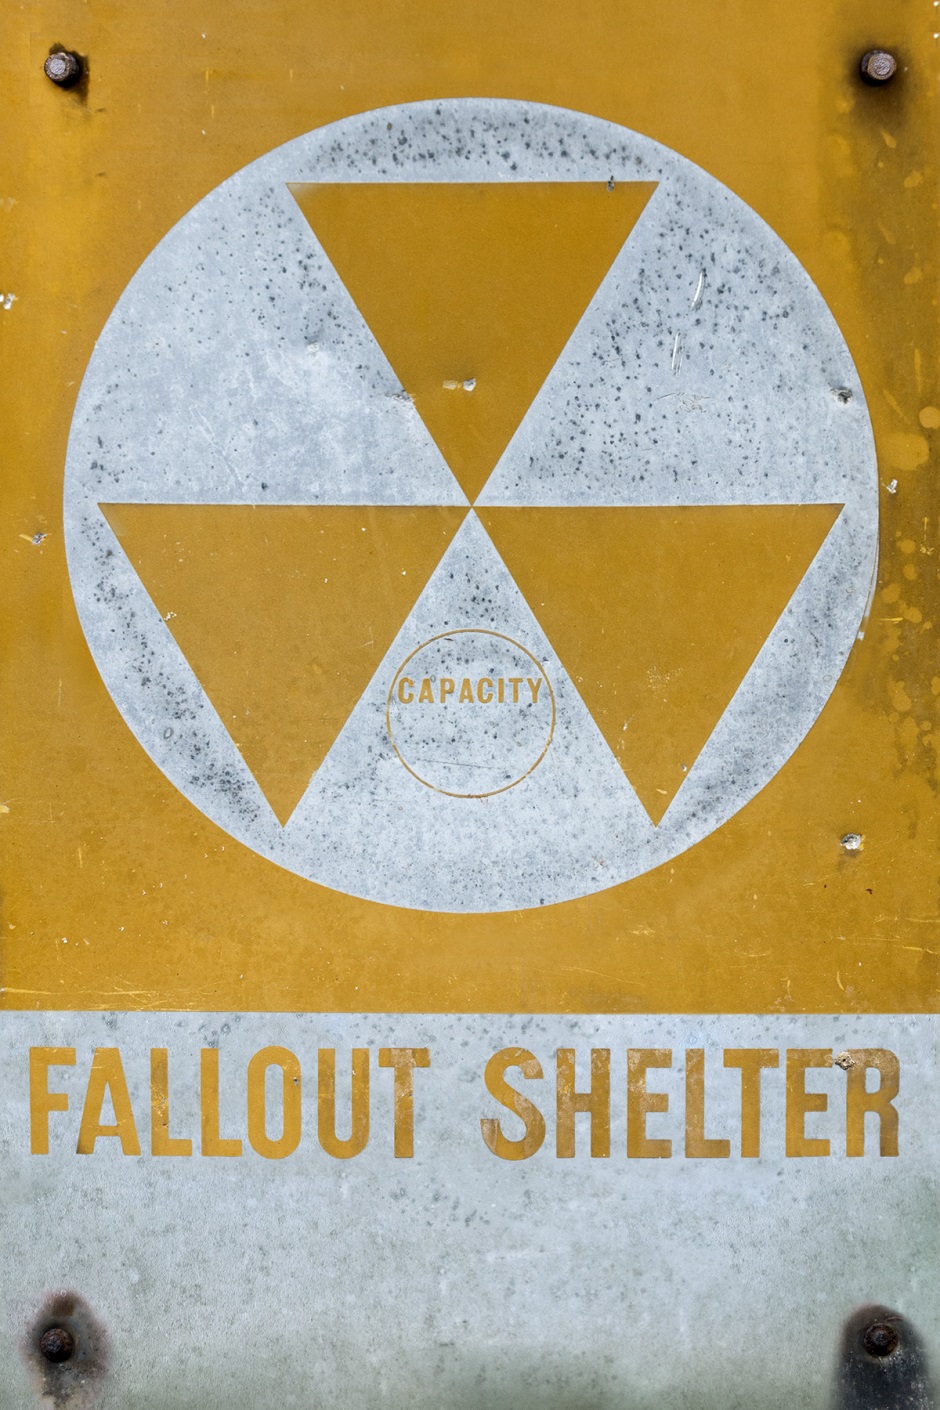 A phot of the PS28 fallout shelter sign.